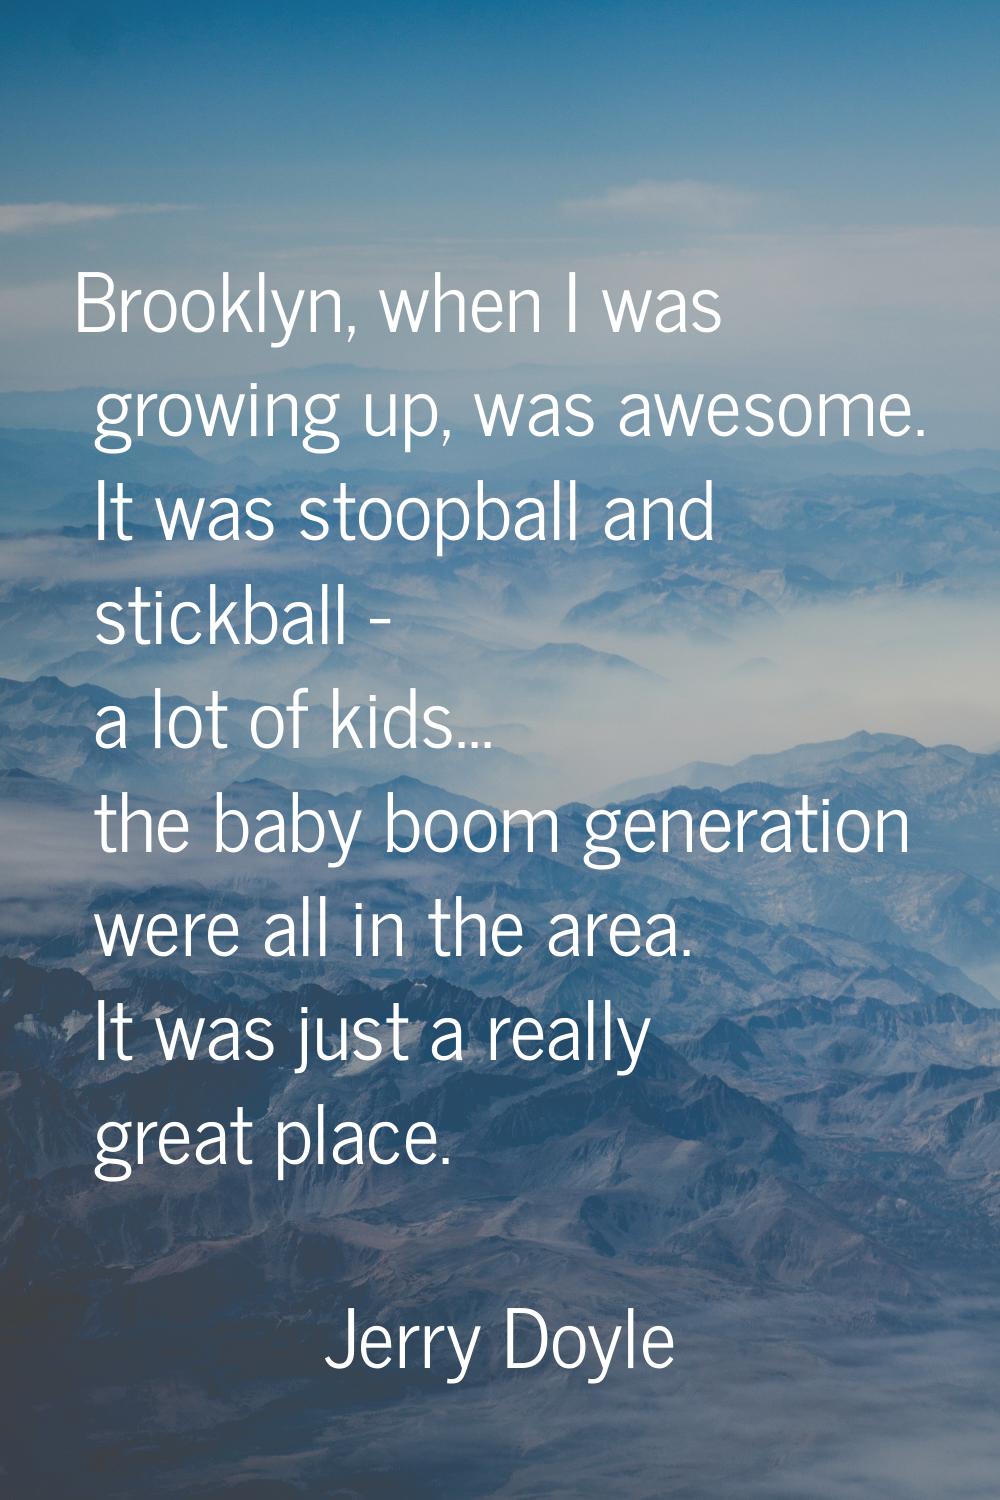 Brooklyn, when I was growing up, was awesome. It was stoopball and stickball - a lot of kids... the